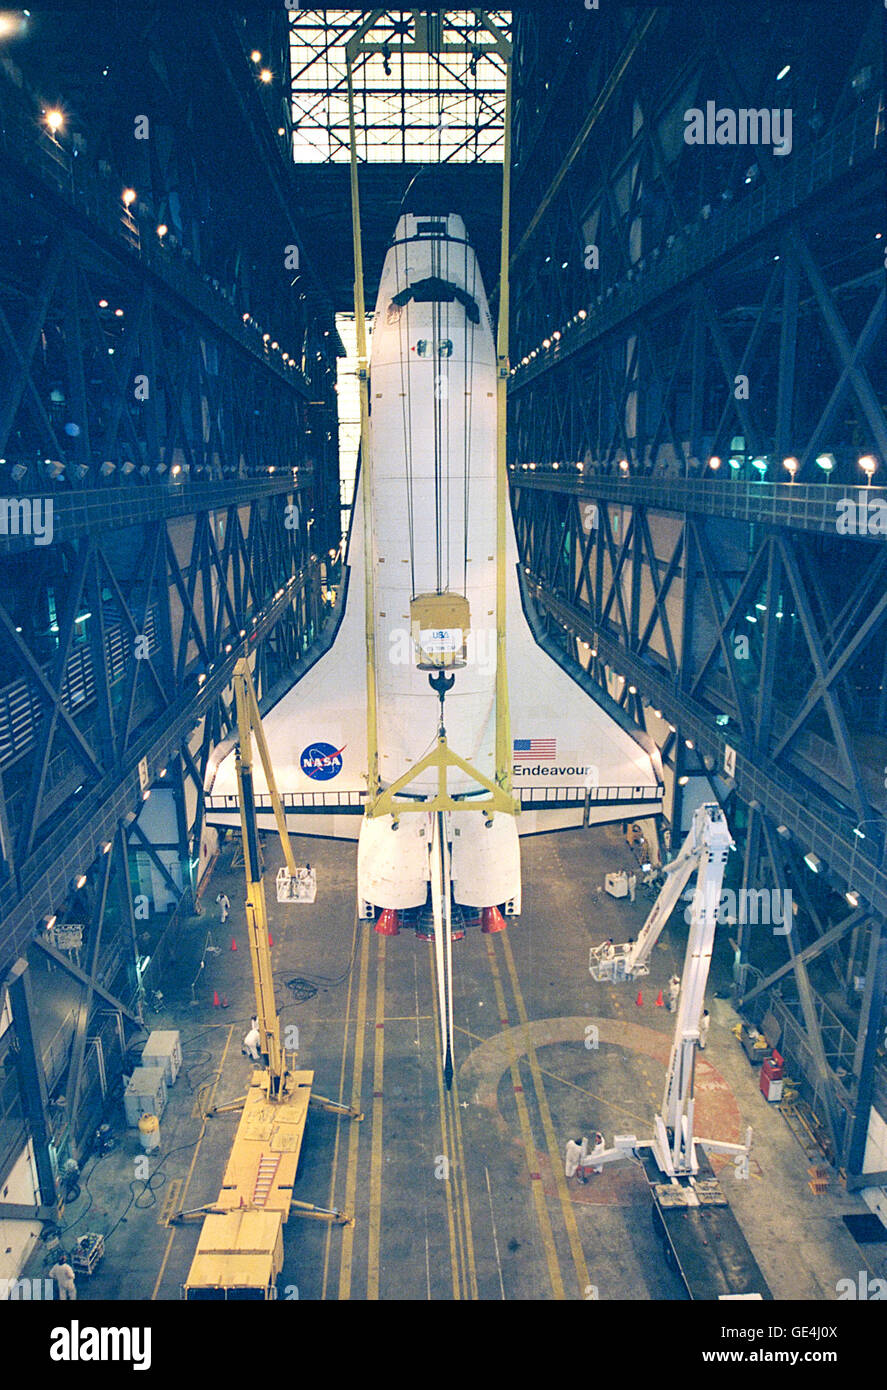 The orbiter Endeavour is suspended in a vertical position inside the Vehicle Assembly Building where it will be mated with its solid rocket boosters and external tank. Endeavour is scheduled to fly on mission STS-88, the first Space Shuttle flight for the assembly of the International Space Station, on December 3, 1998. The primary payload on the mission is the Unity connecting module, which will be mated to the Russian-built Zarya Control Module already in orbit at that time.   Image # : 98PC-1341 Stock Photo